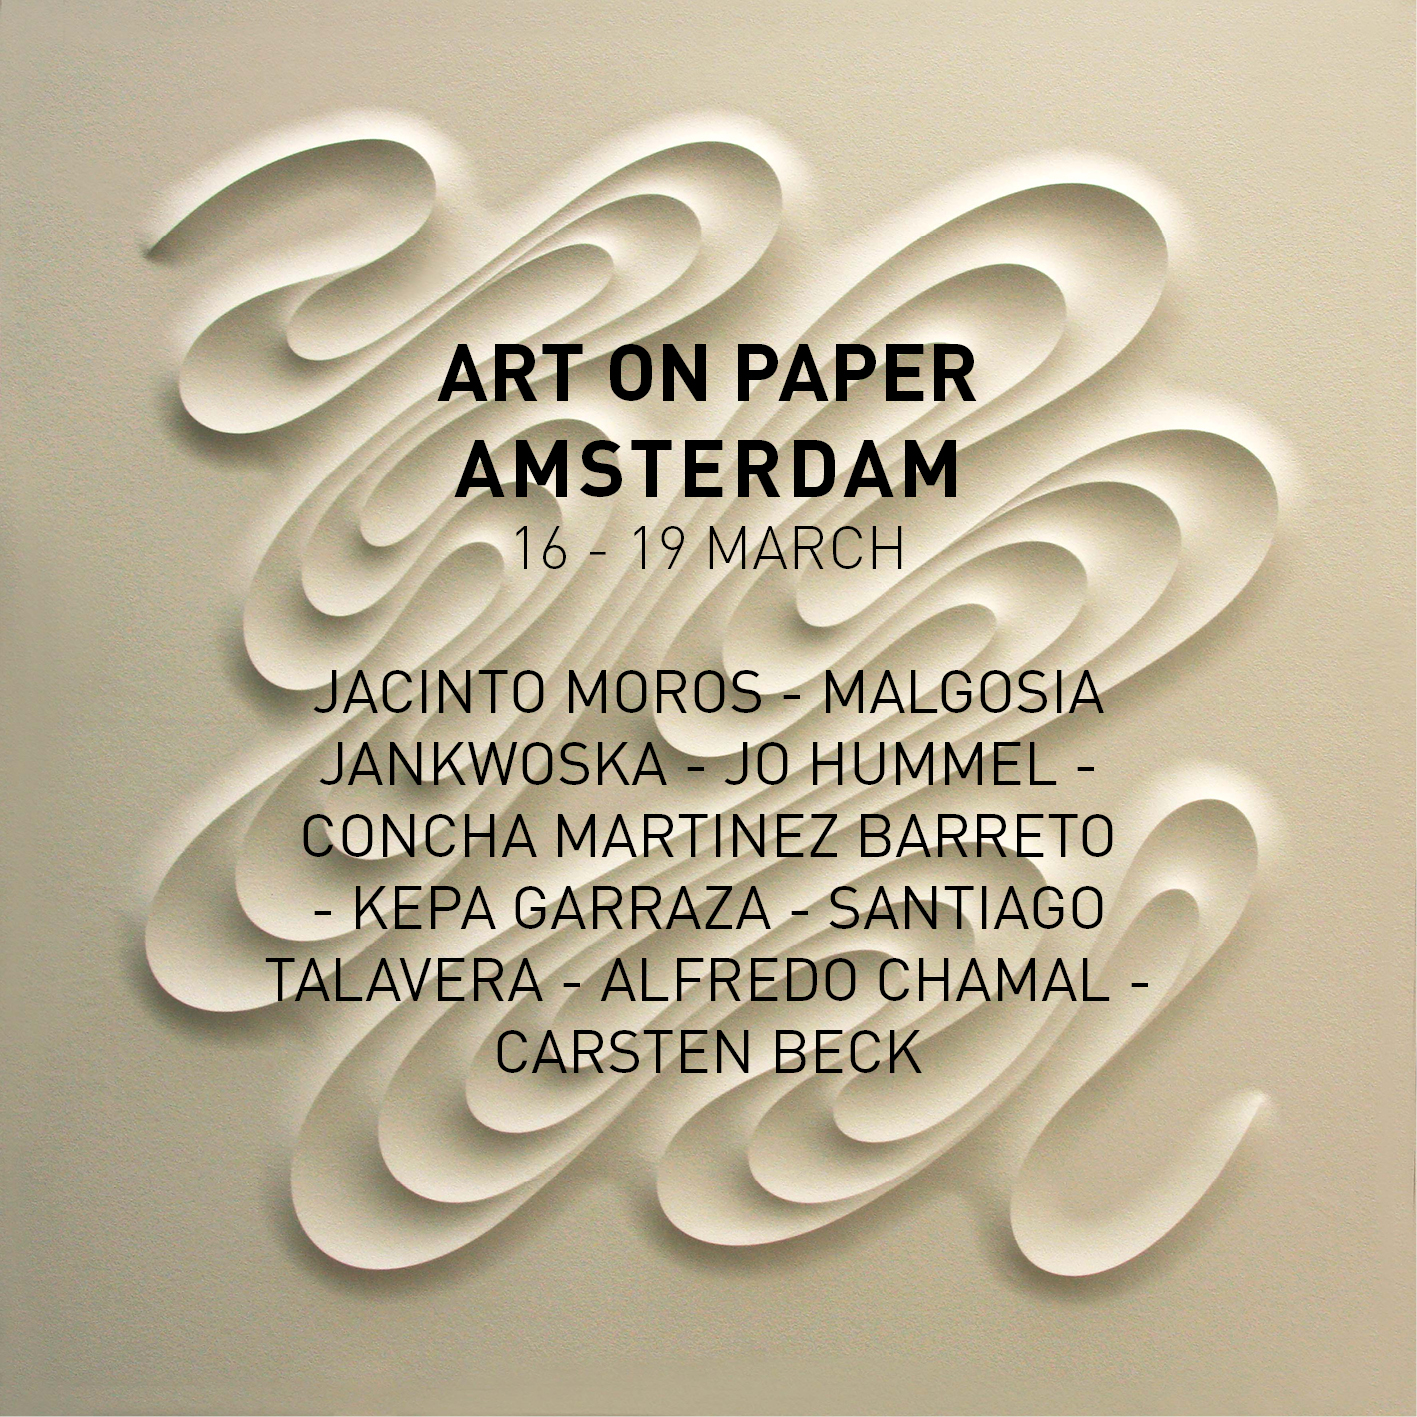 Gallery Victor Lope at Art on paper Amsterdam